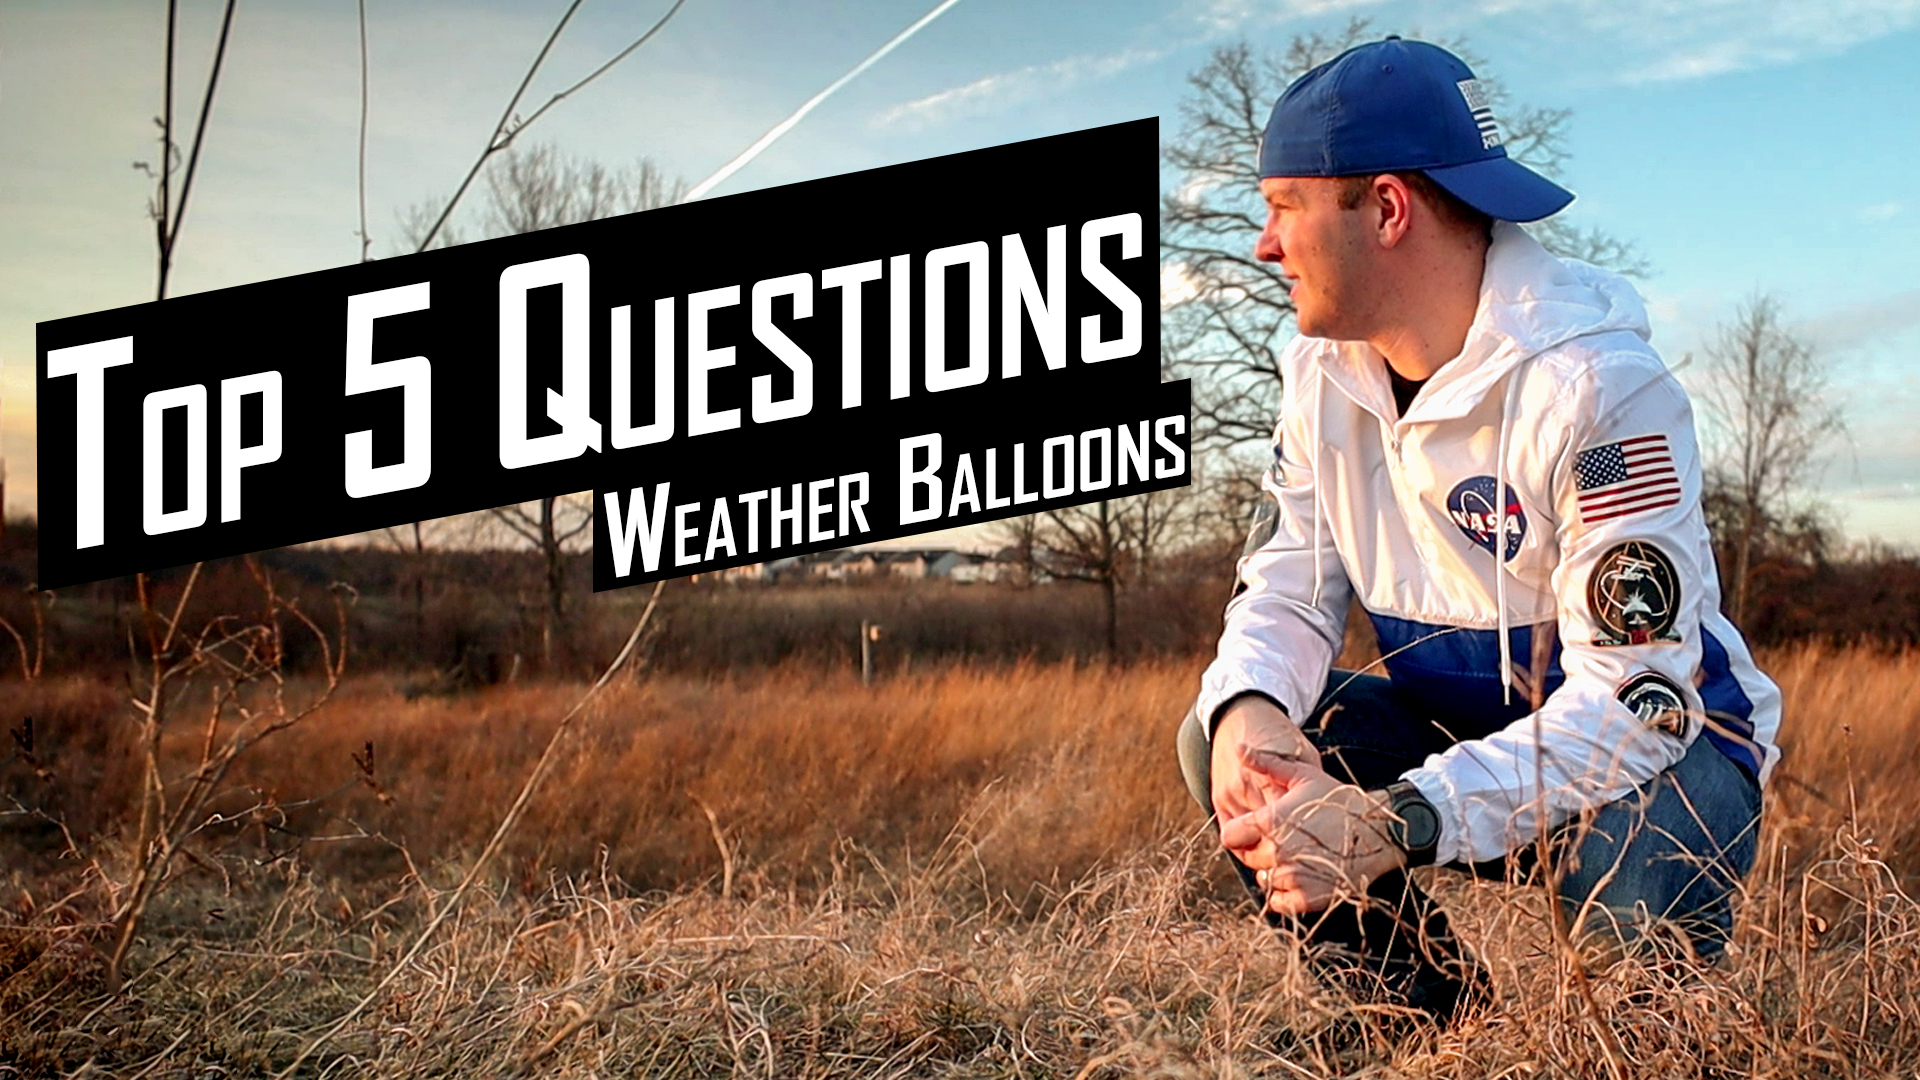 Top 5 Questions Weather Balloon Engineer